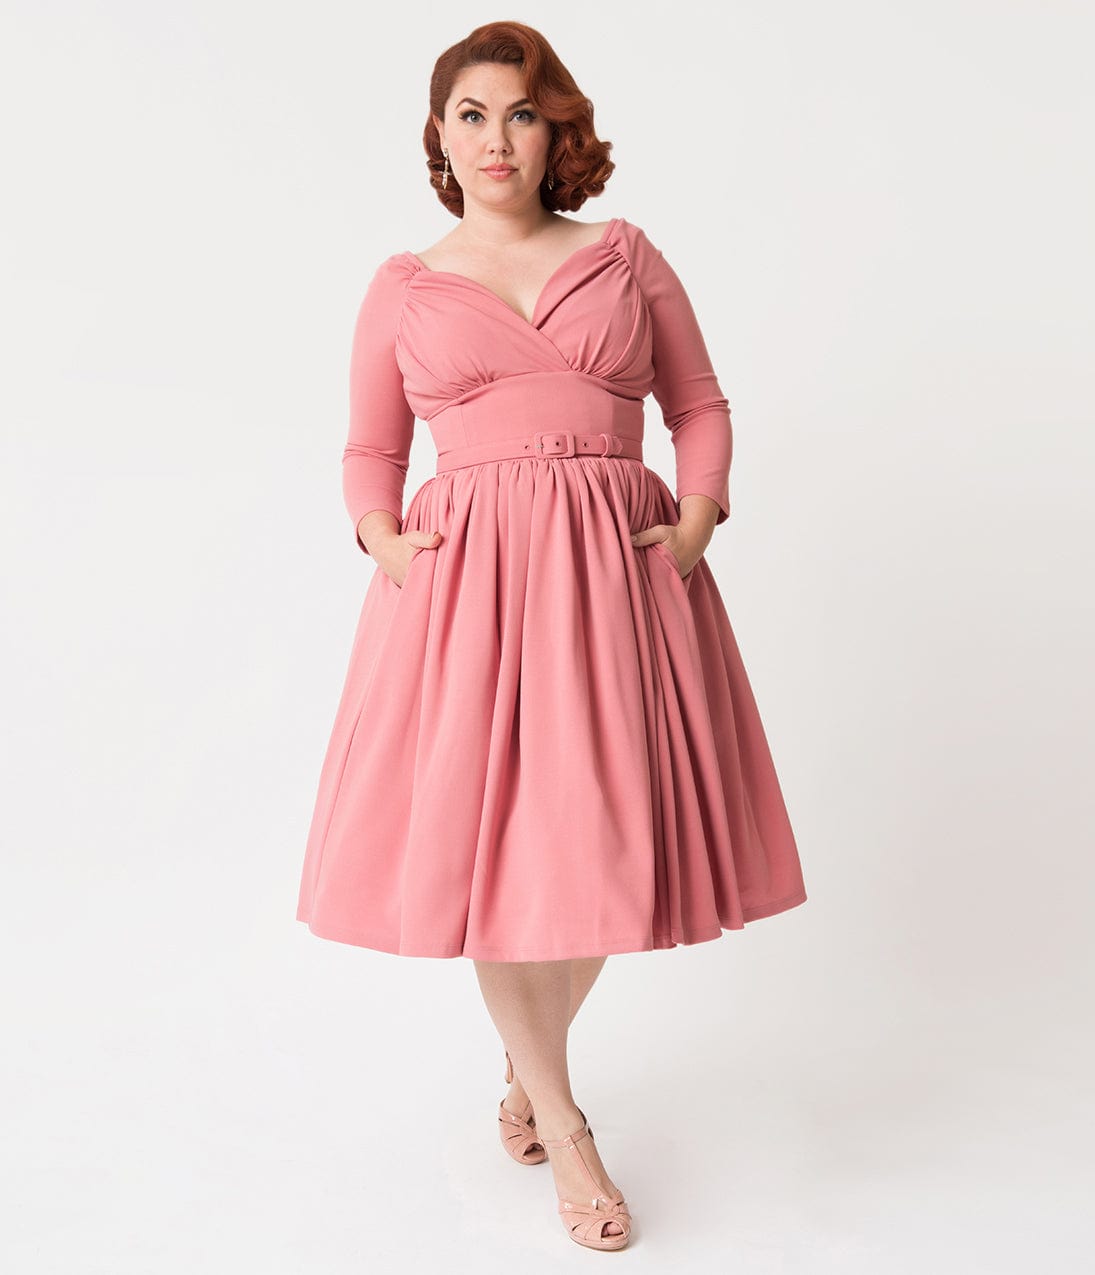 1950s Plus Size Fashion and Clothing History